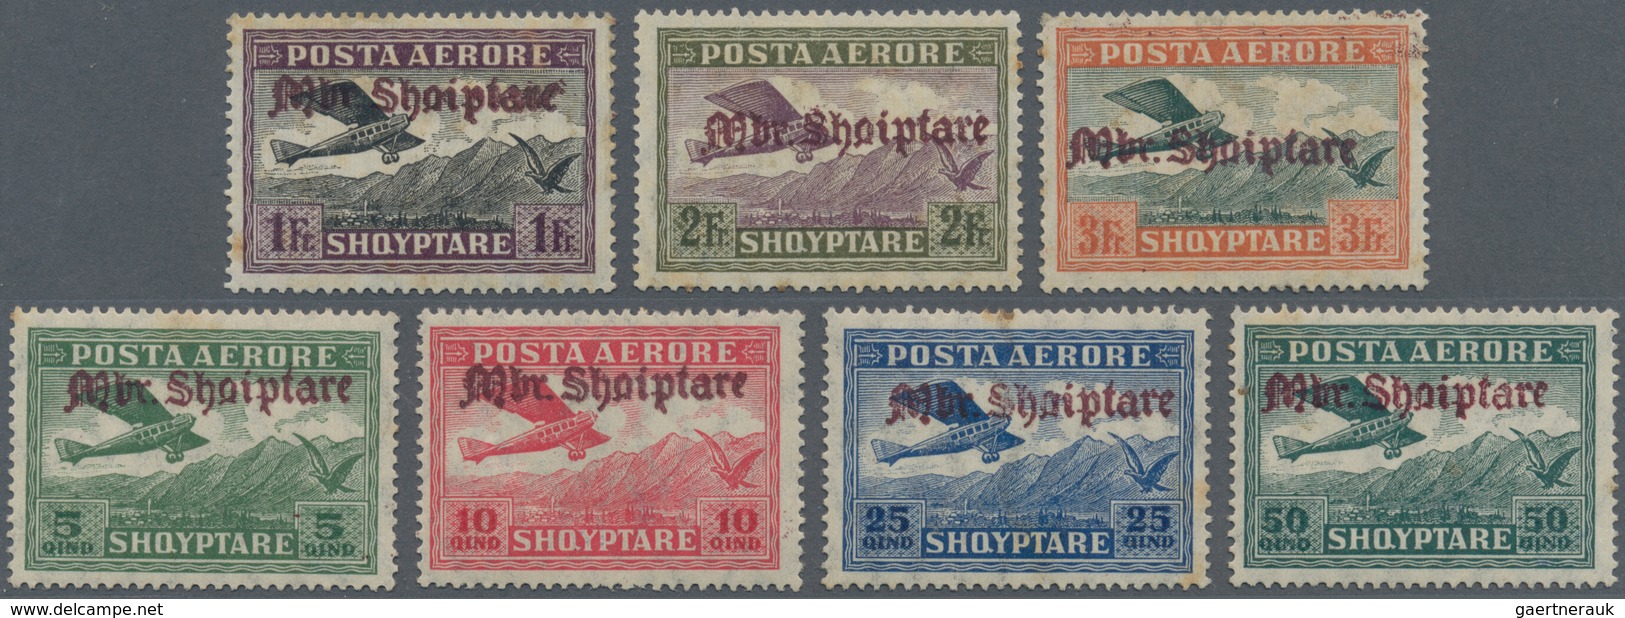 13329 Albanien: 1929. Kingdom. Complete Airmail Set (7 Values) Overprinted In Redbrown "Mbr. Shqiptare". U - Albanie